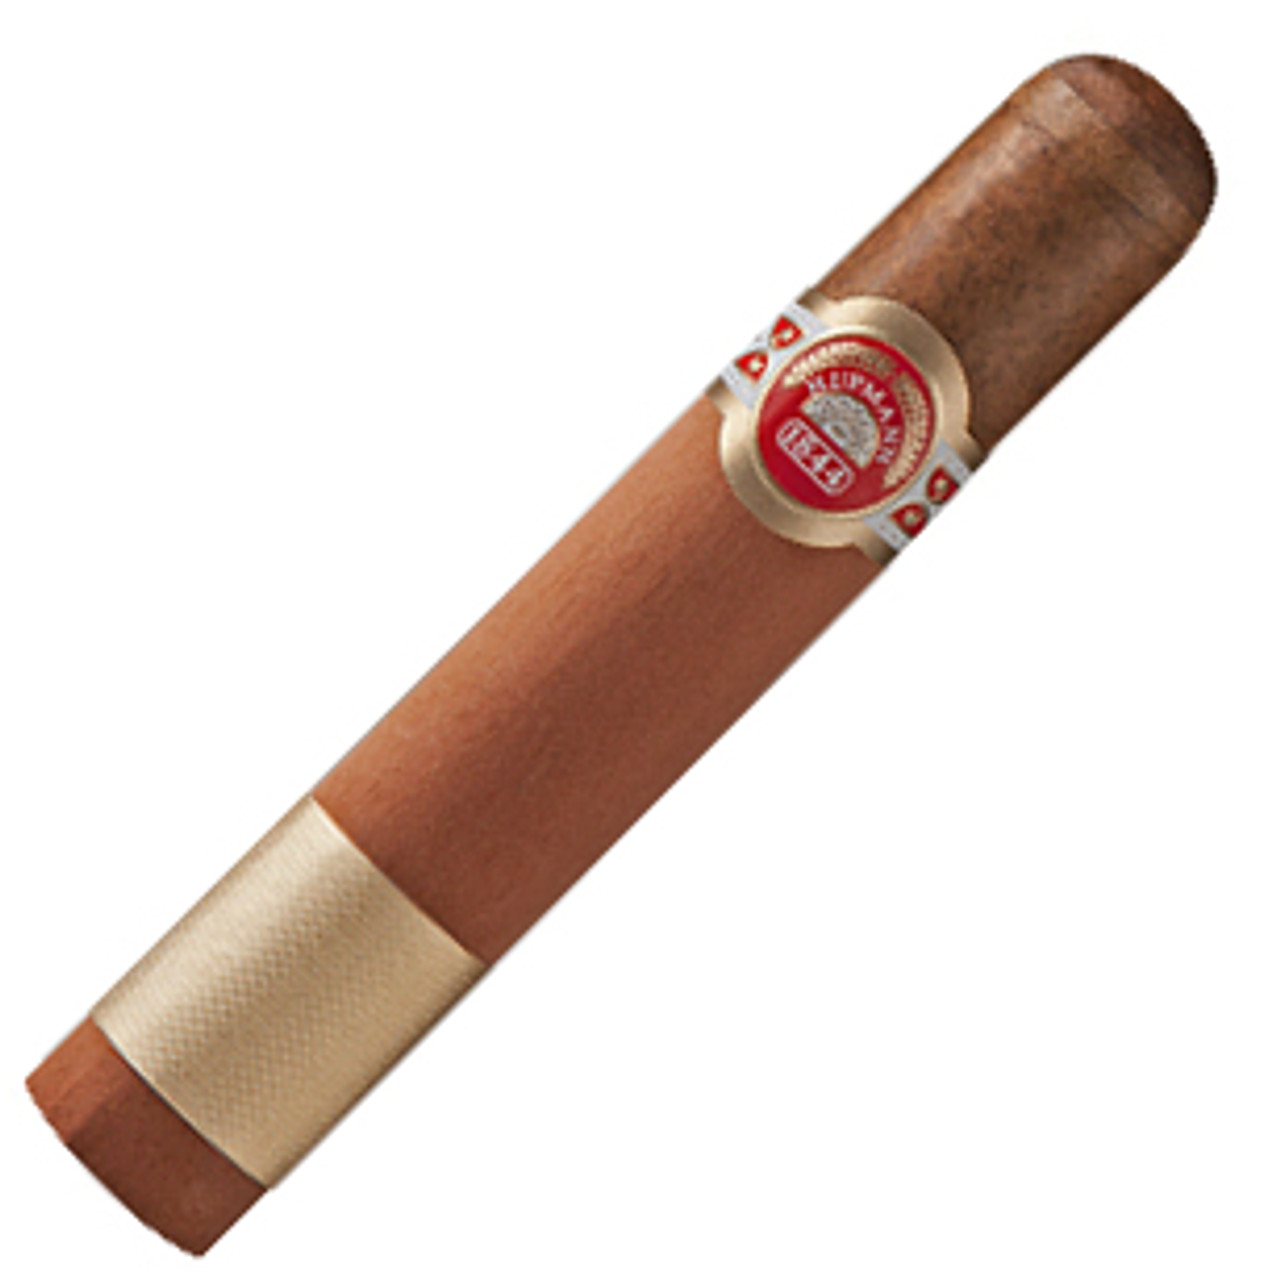 H. Upmann Special Seleccion Rothschilde Cigars - 5 x 50 (Box of 25)